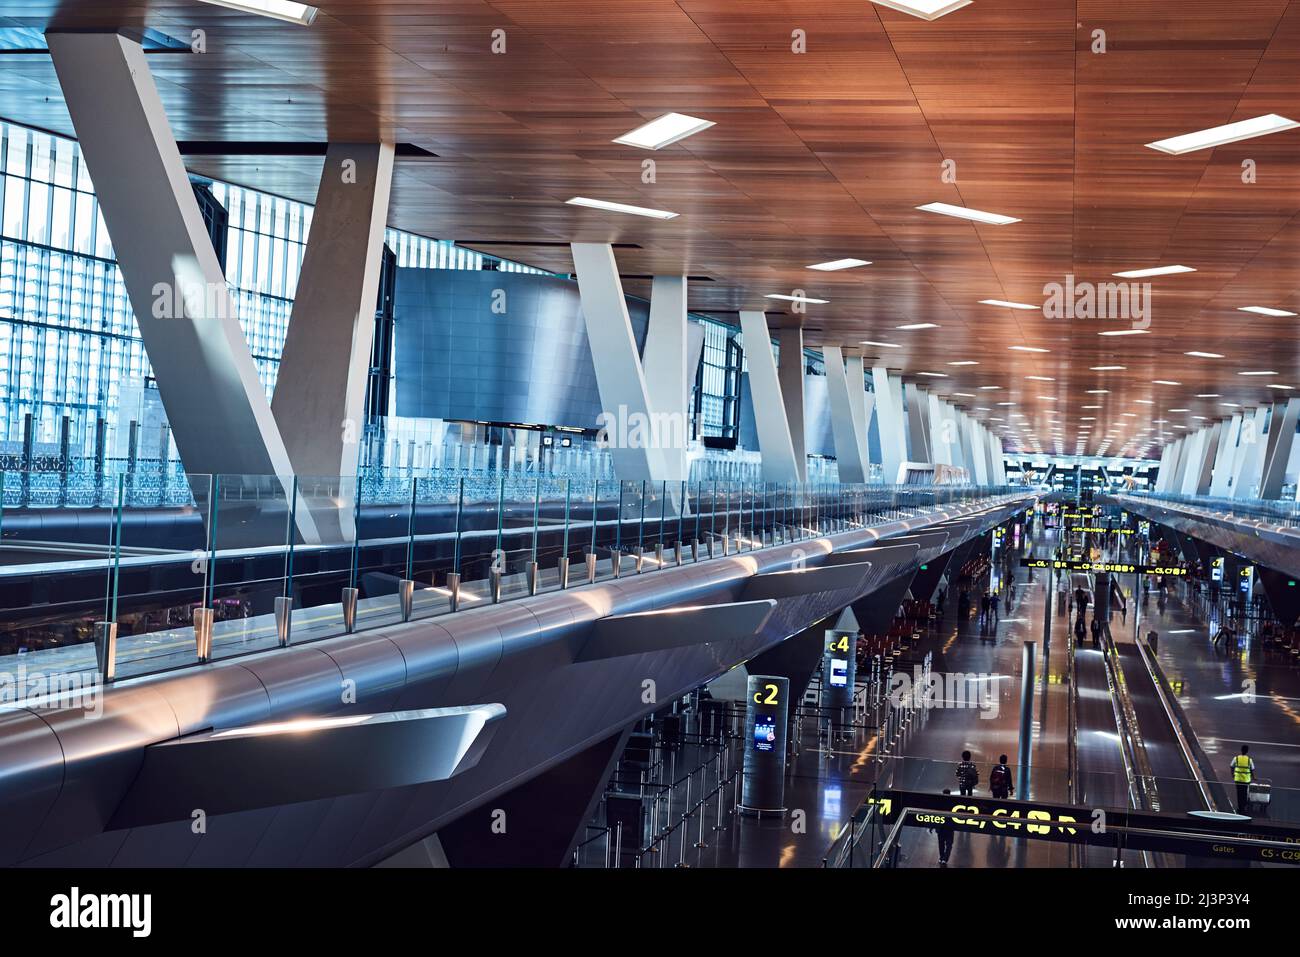 Arriving and departing. Shot of the inside of an airport. Stock Photo